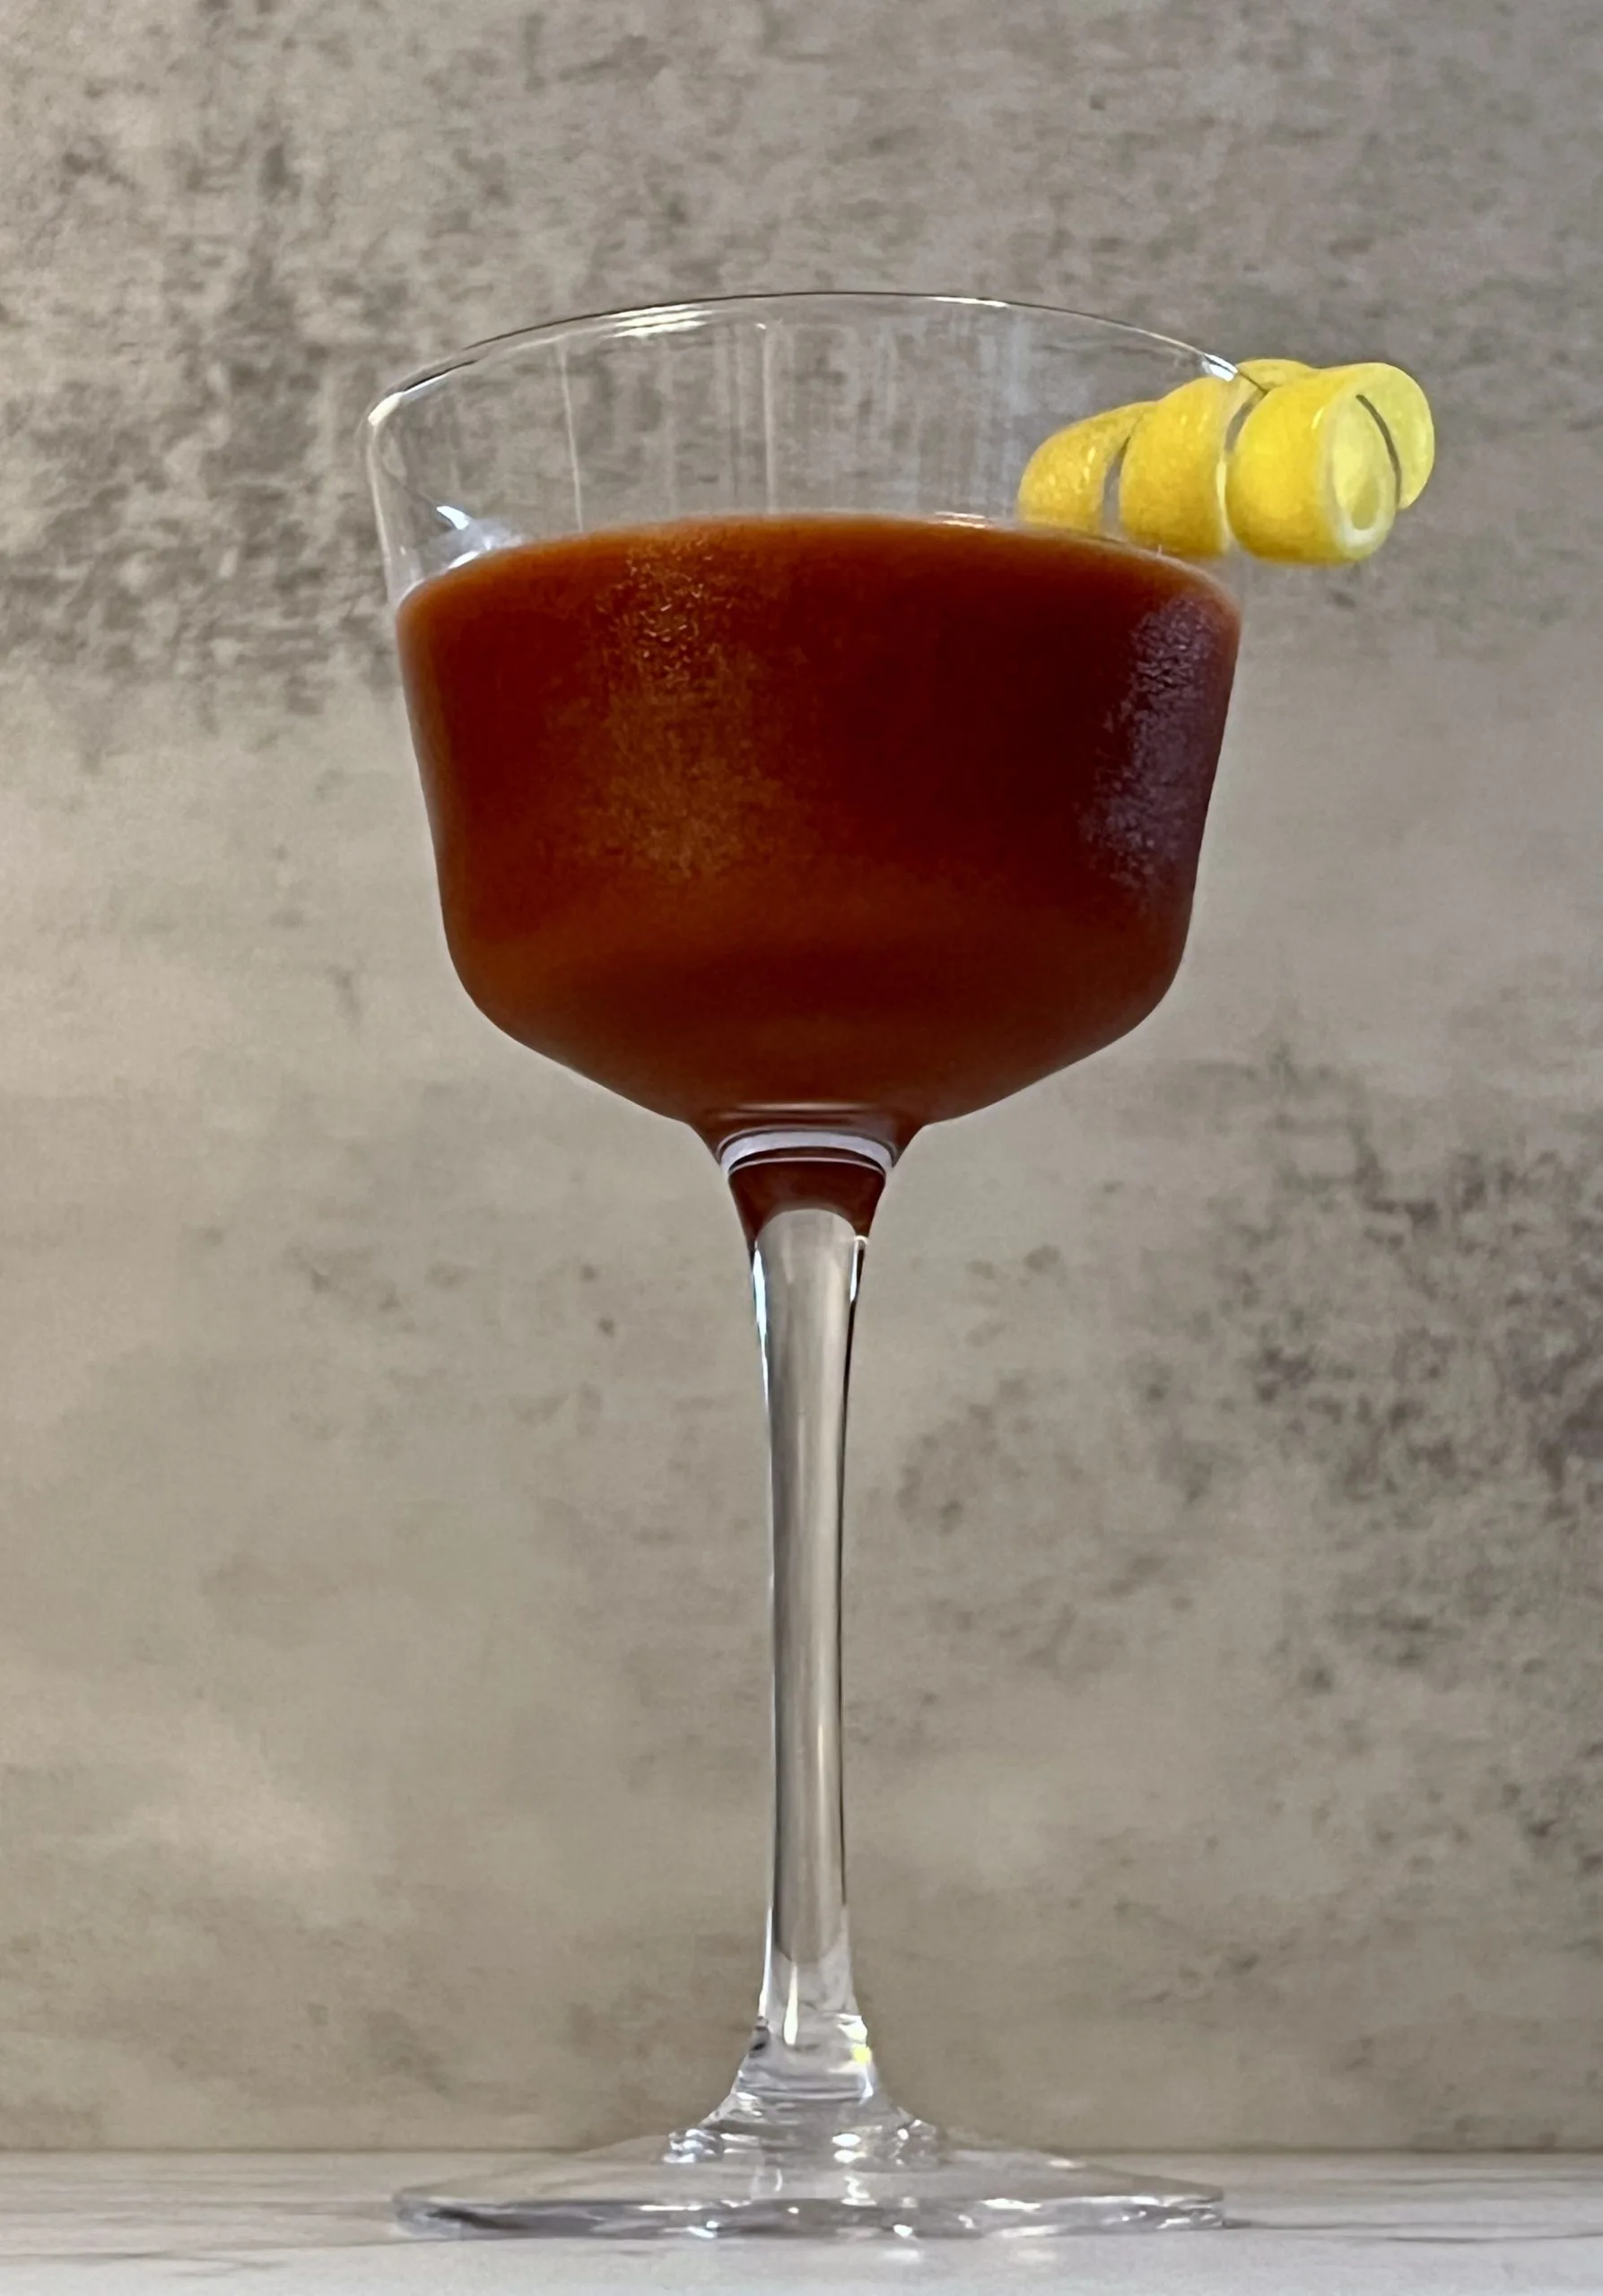 A dramatic close up shot of a vivid reddish-brown Trinidad Sour on a countertop garnished with a lemon twist.